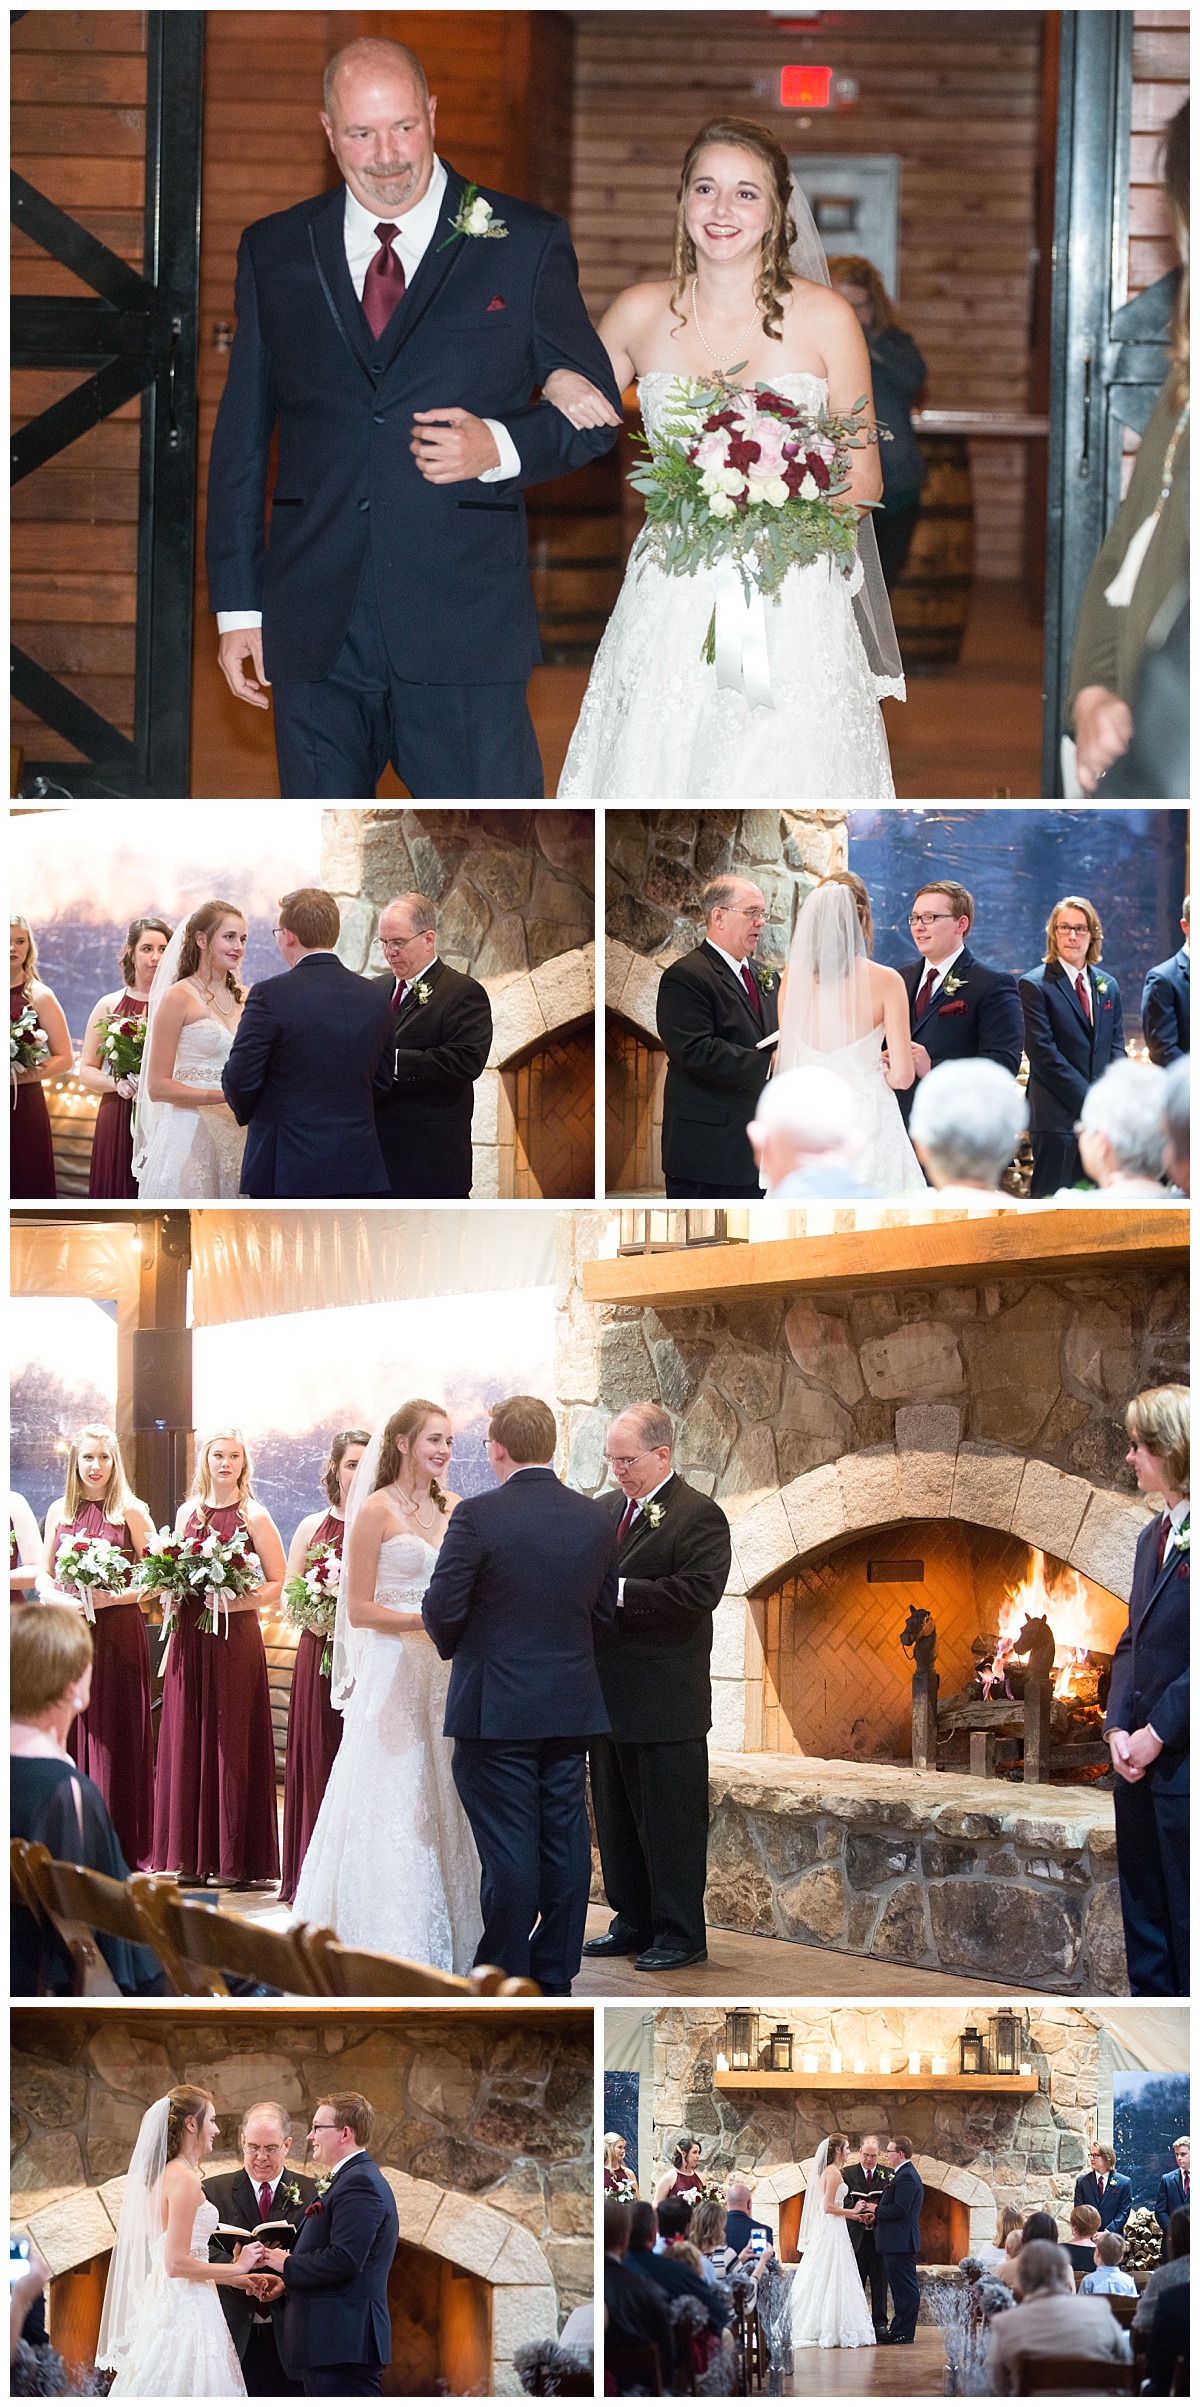 Winter sunset ceremony at Farm at Ridgeway by fireplace